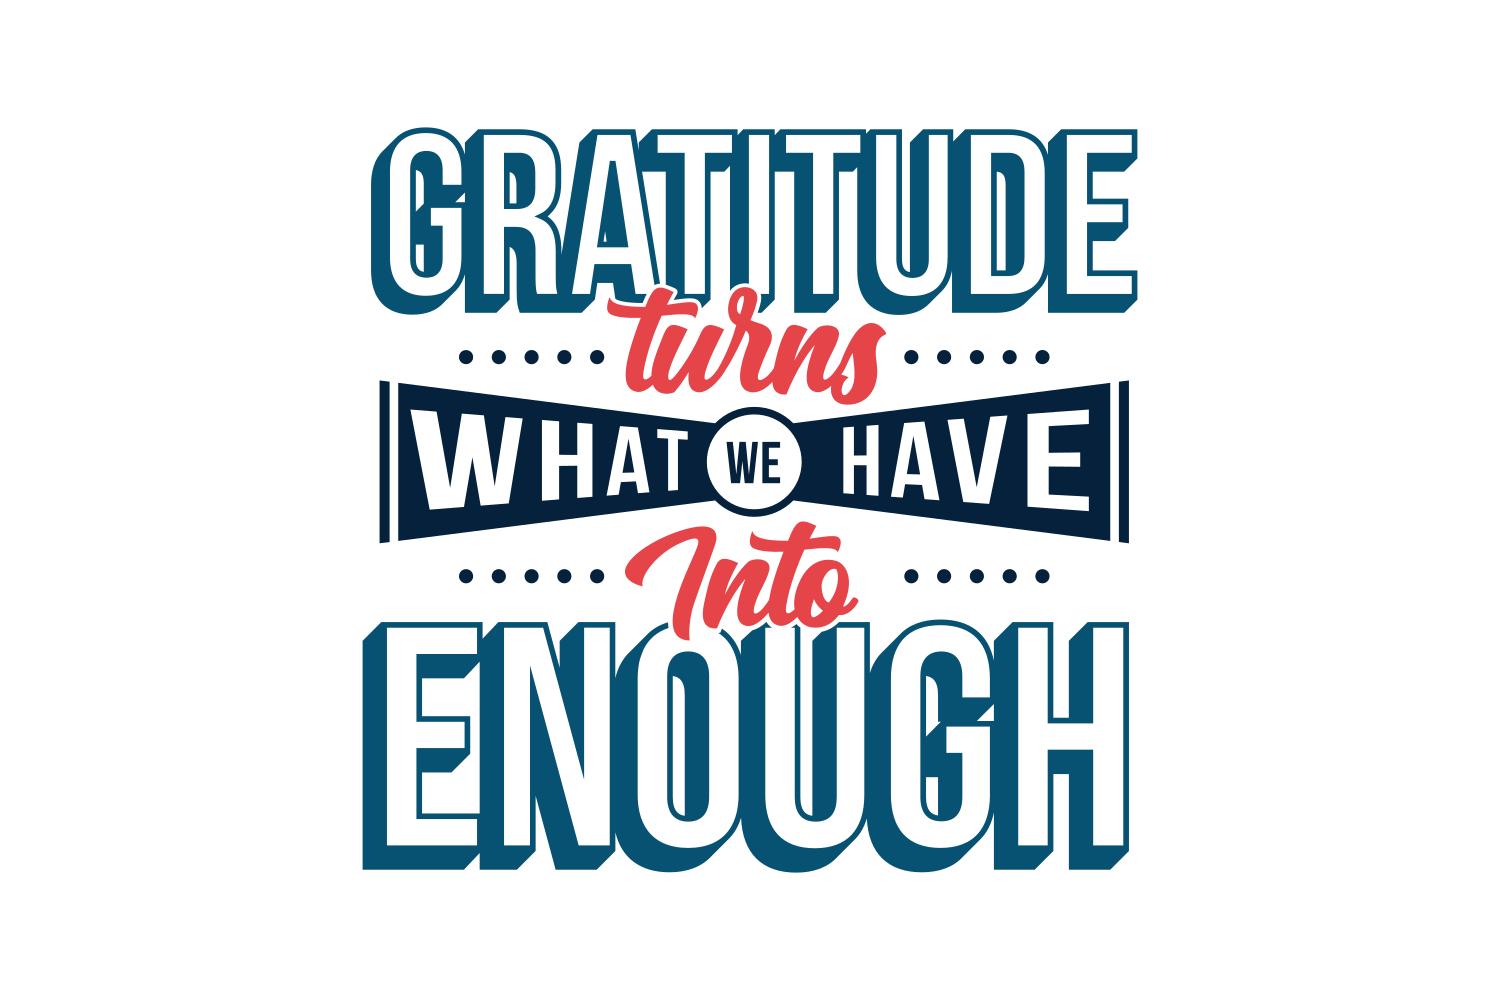 Gratitude Turns What We Have into Enough